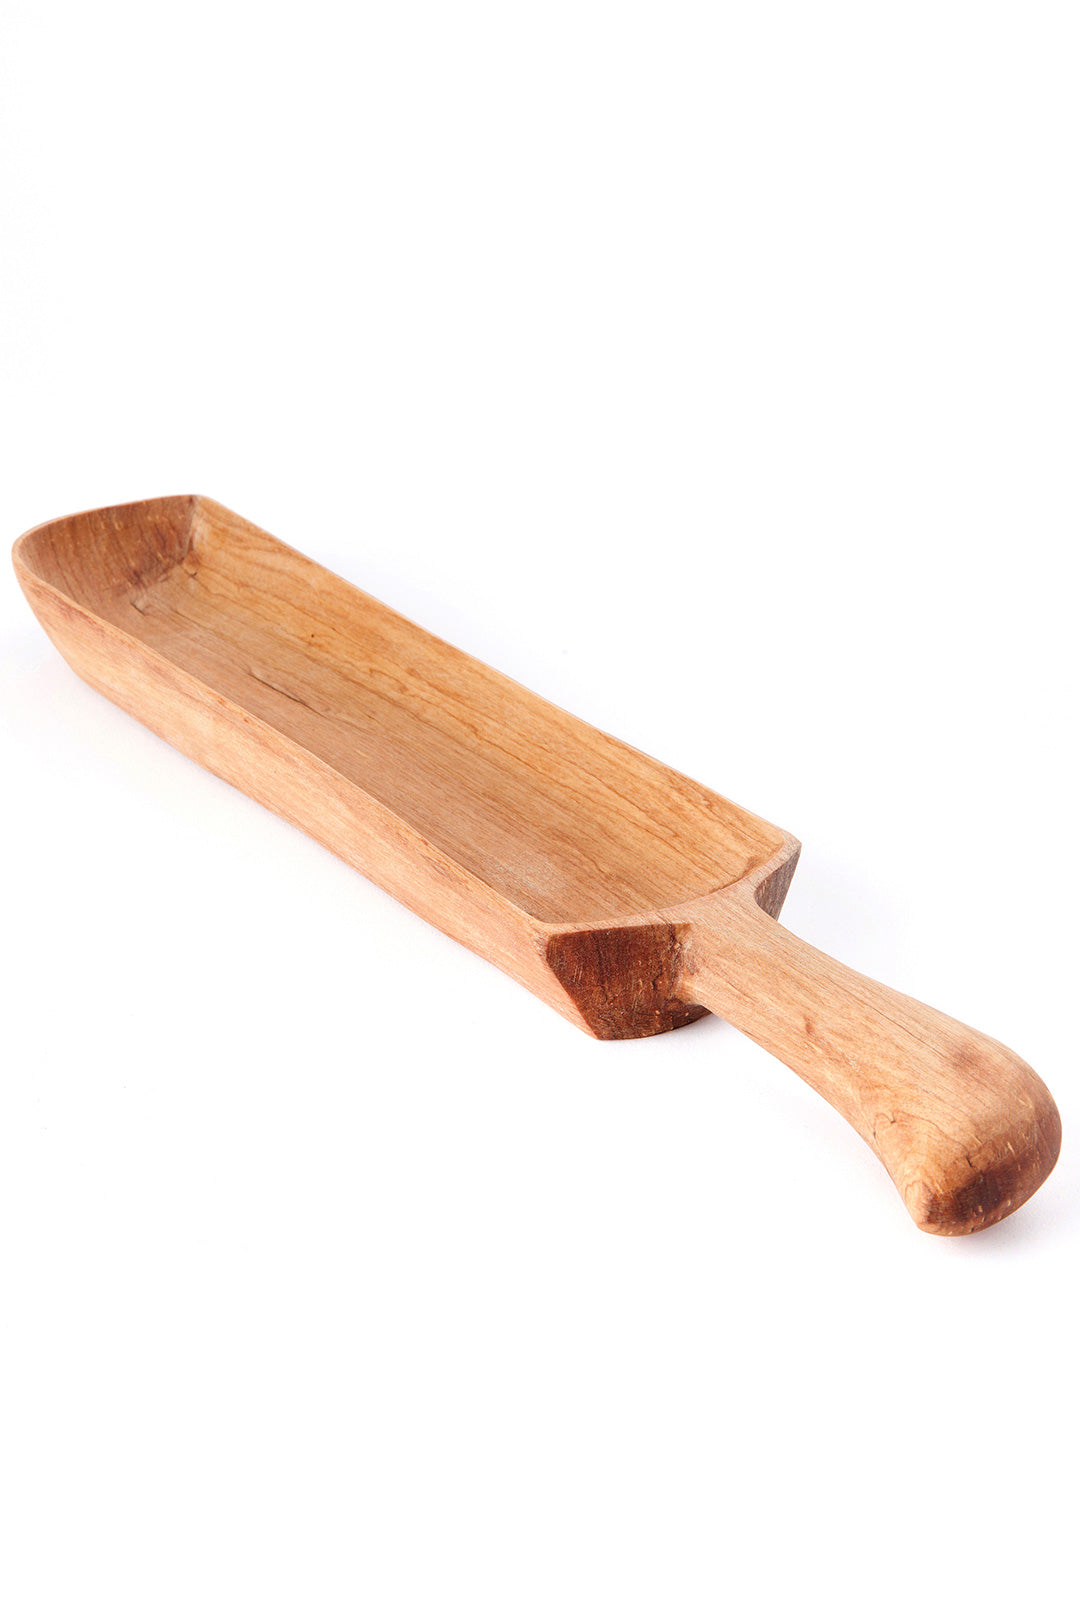 Long Olive Wood Cracker Tray with Handle Long Olive Wood Cracker Tray with Handle